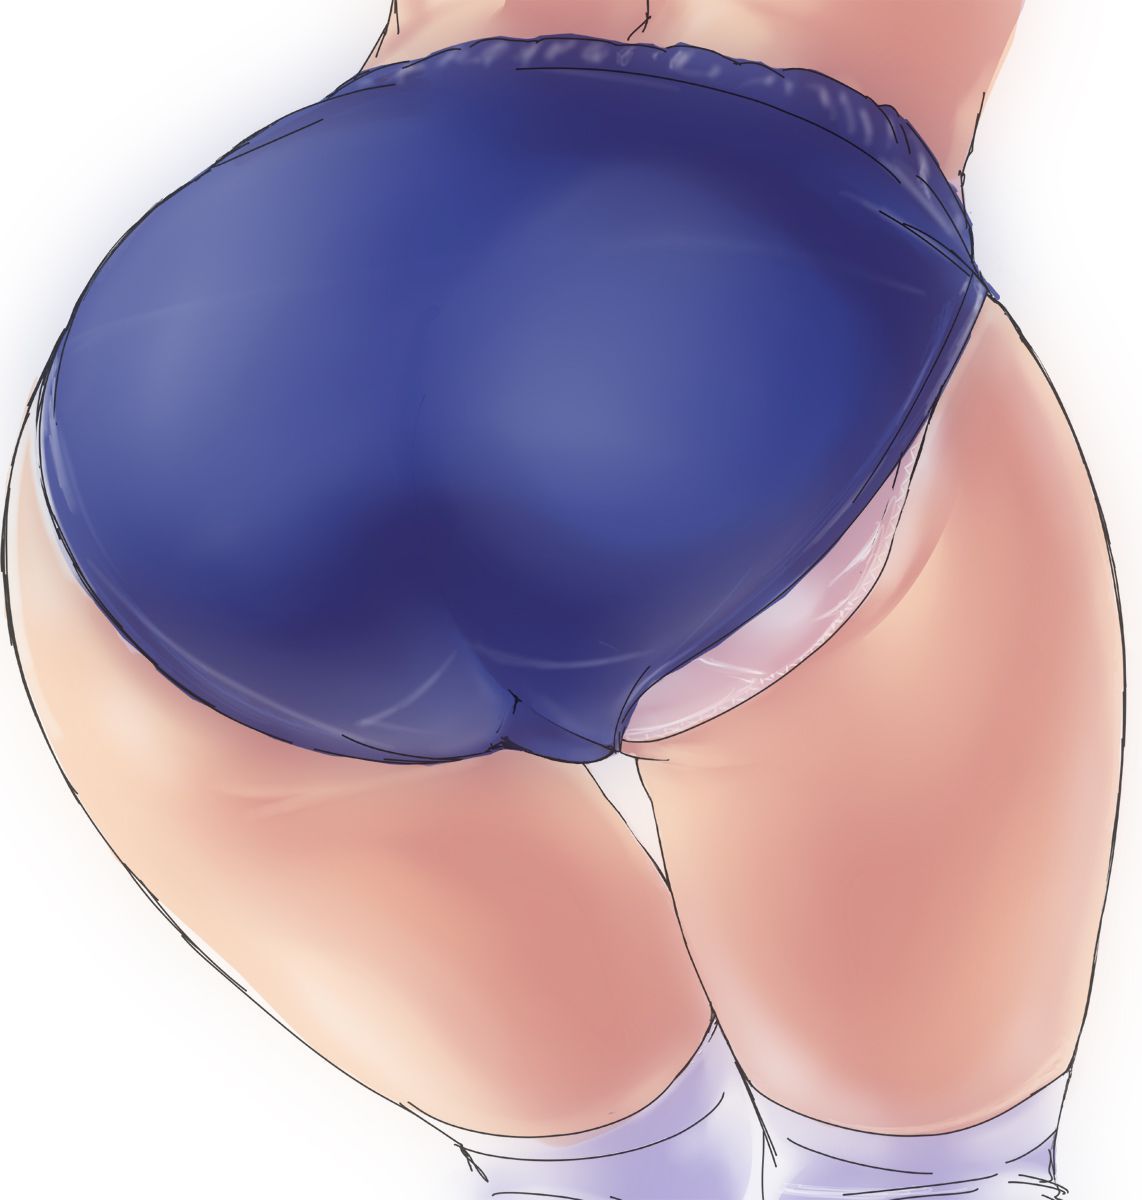 【Secondary erotica】 Here is a close-up erotic image where you can observe pants and well 19